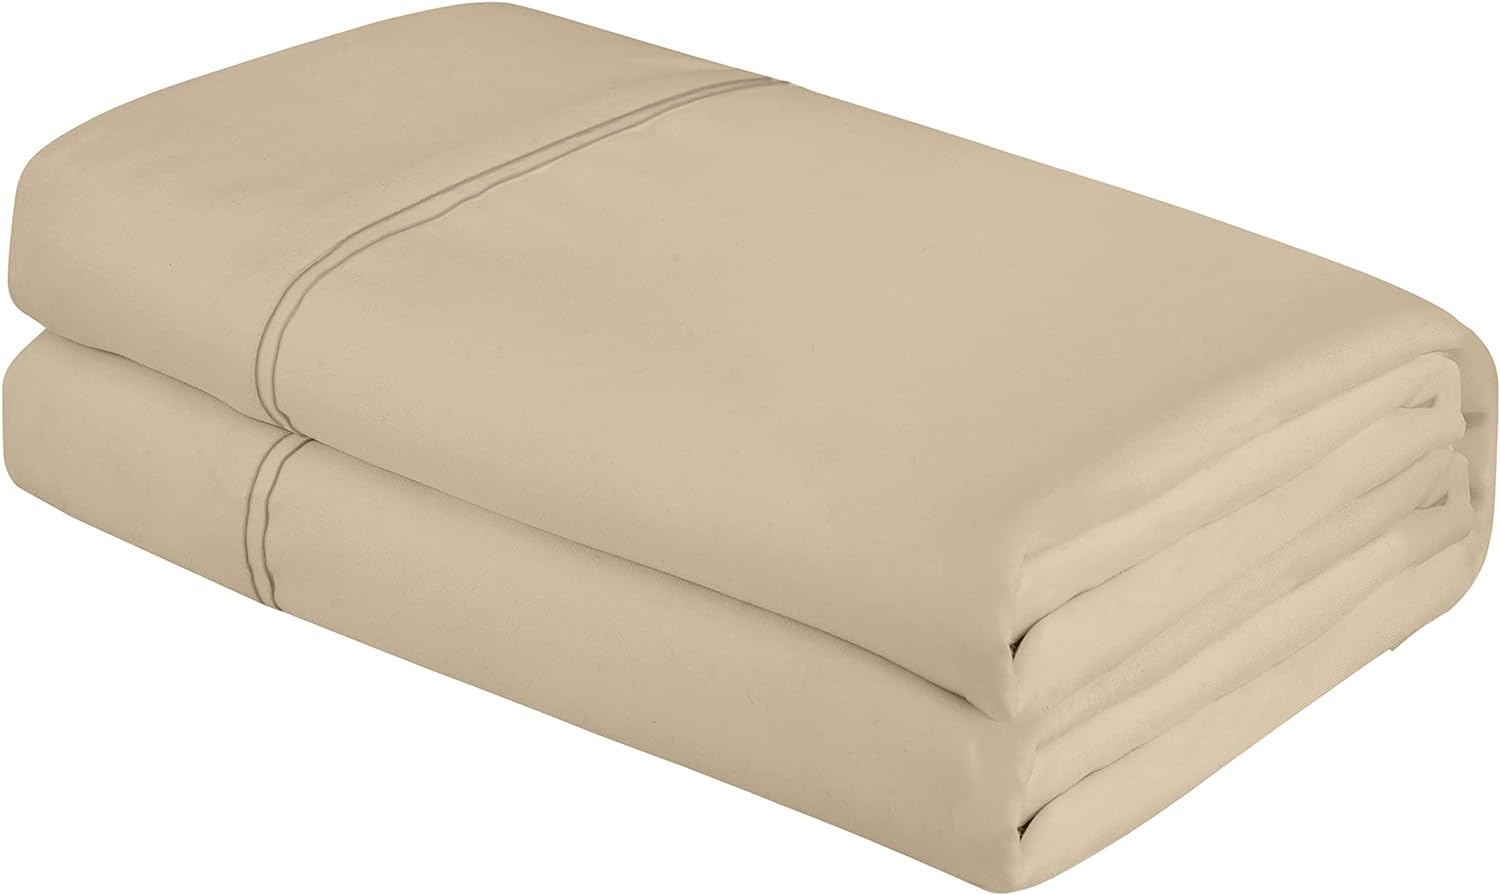 Royale Linens Twin Size Flat Sheet Only - Brushed 1800 Microfiber - Ultra Soft & Breathable - Wrinkle & Stain Resistant - Hotel Quality Flat Sheet Sold Separately - Top Sheet for Bed - (Twin, Sand)